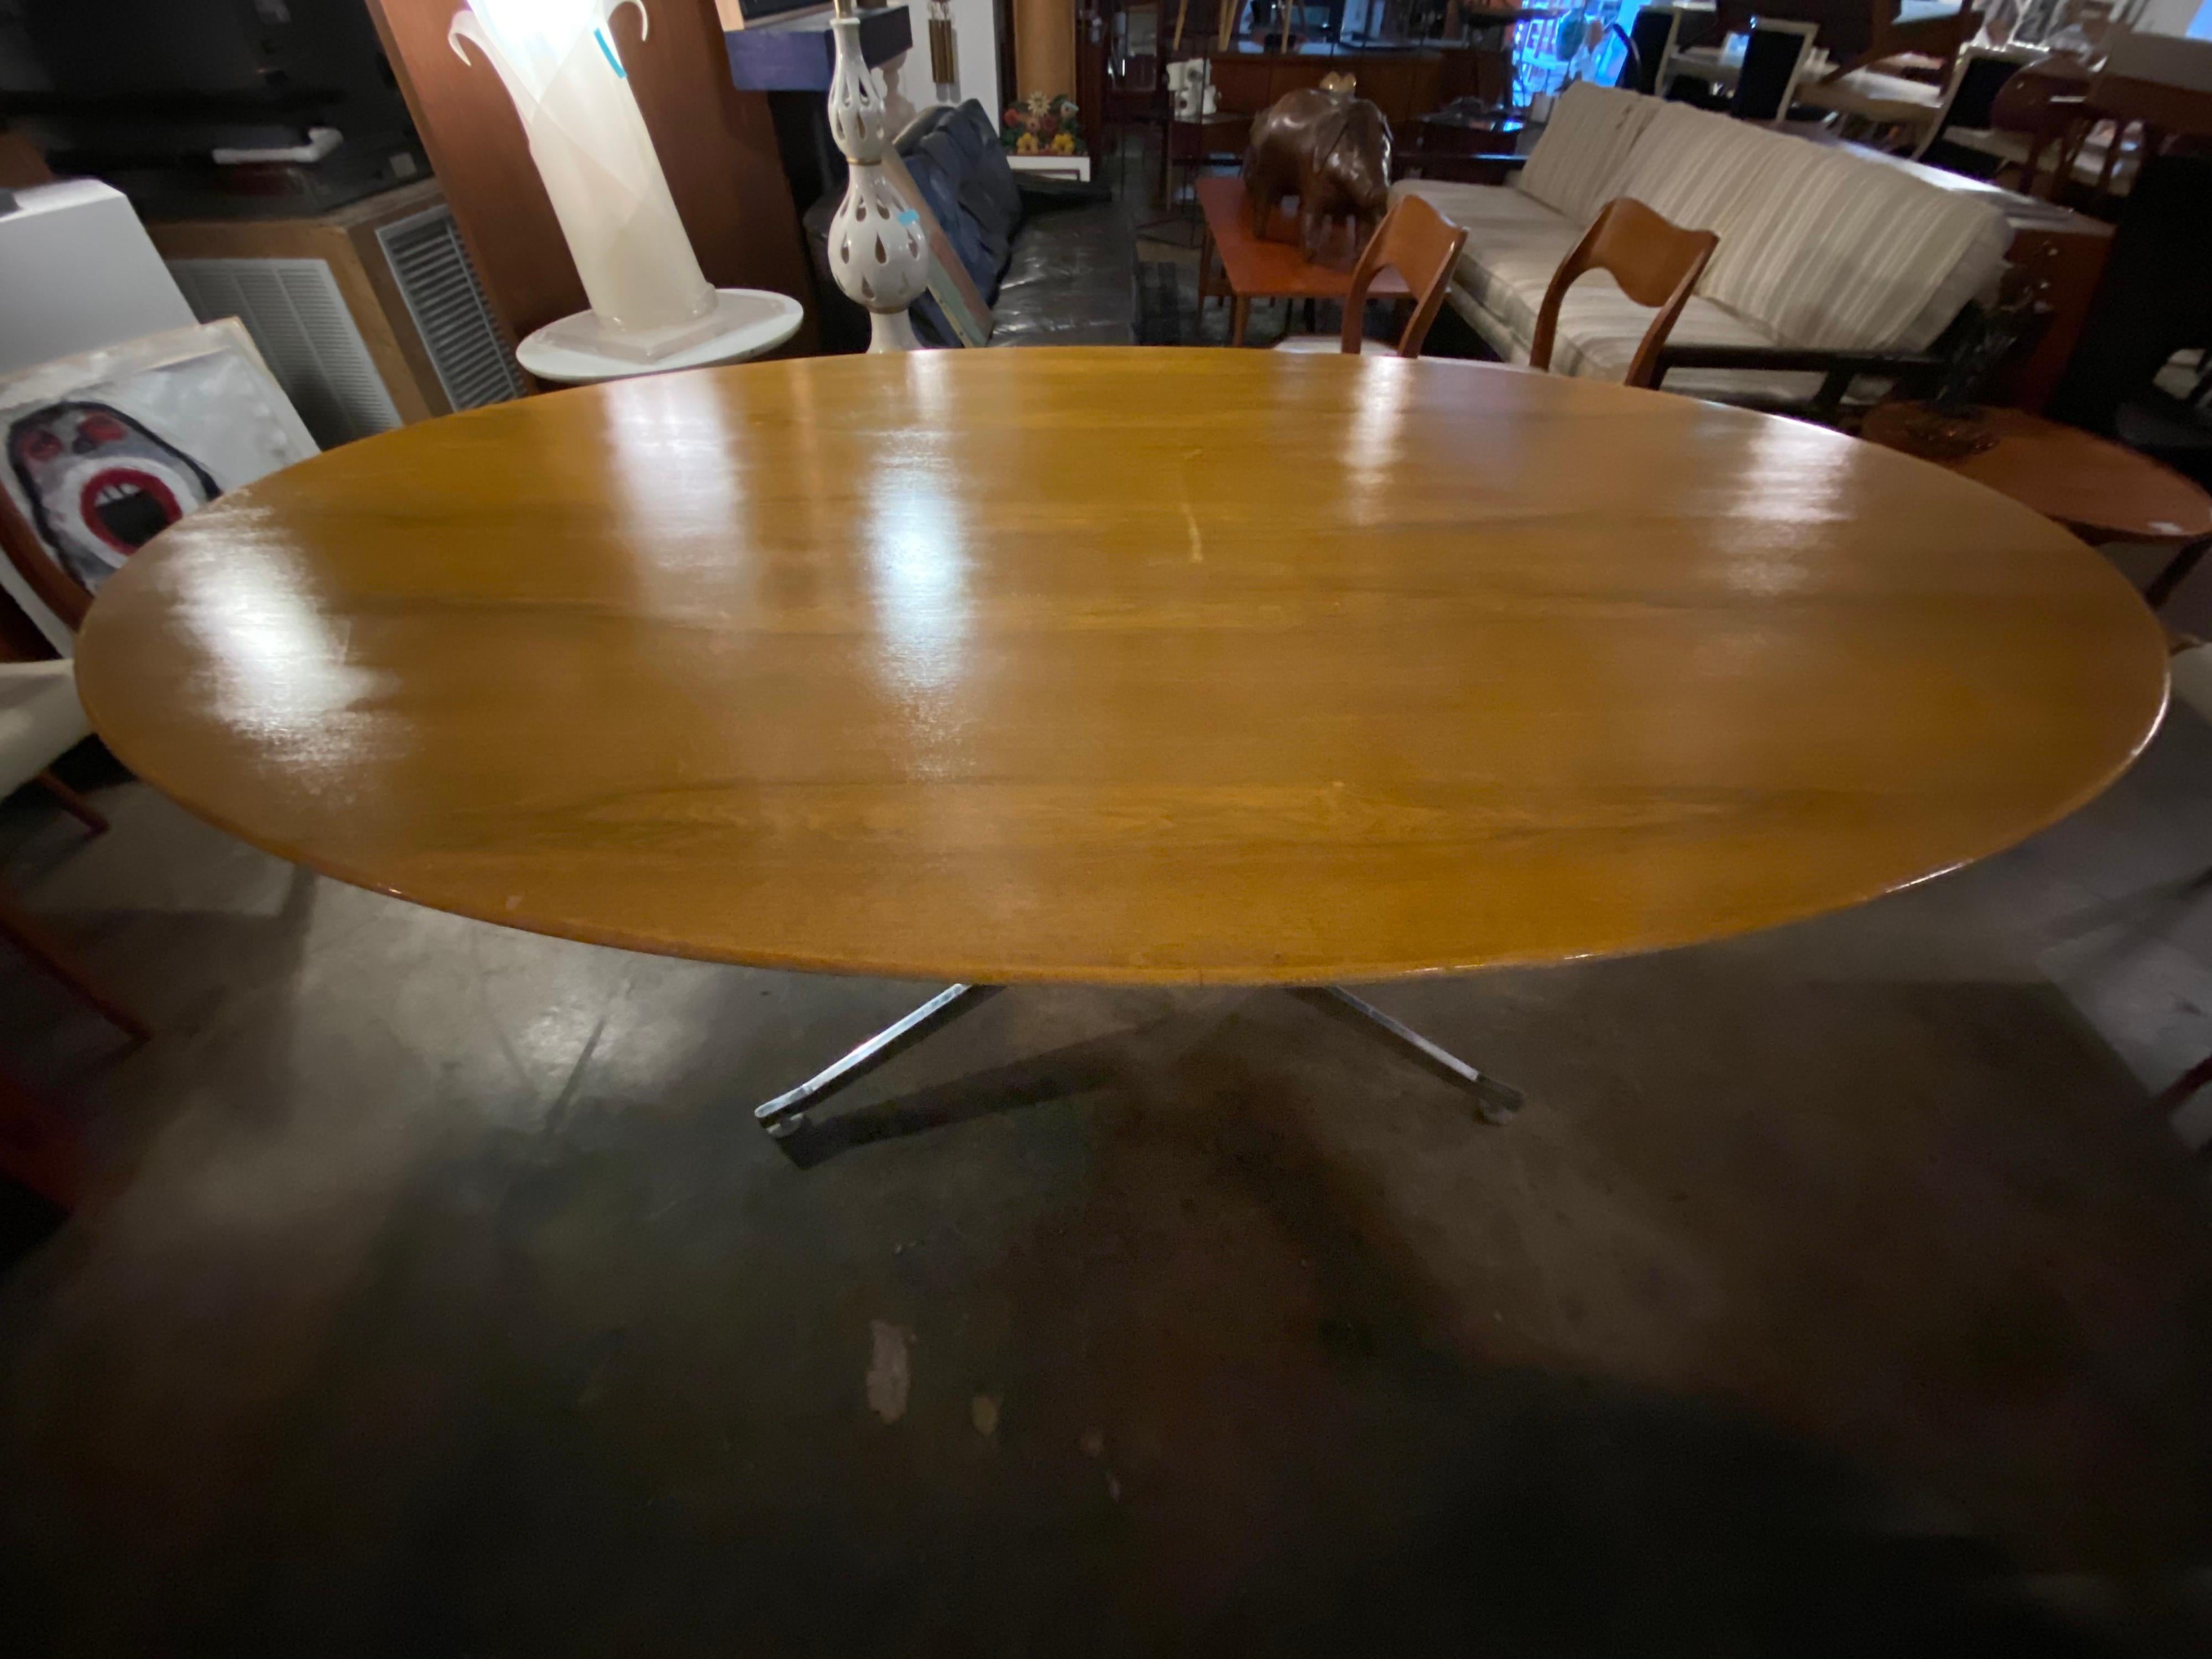 Mid-Century Modern table designed by Florence Knoll. In good condition, this vintage table is oval shaped, walnut wood top with a chrome base, and can easily seat eight. This large table is beautiful as a dining table or can be used as an office